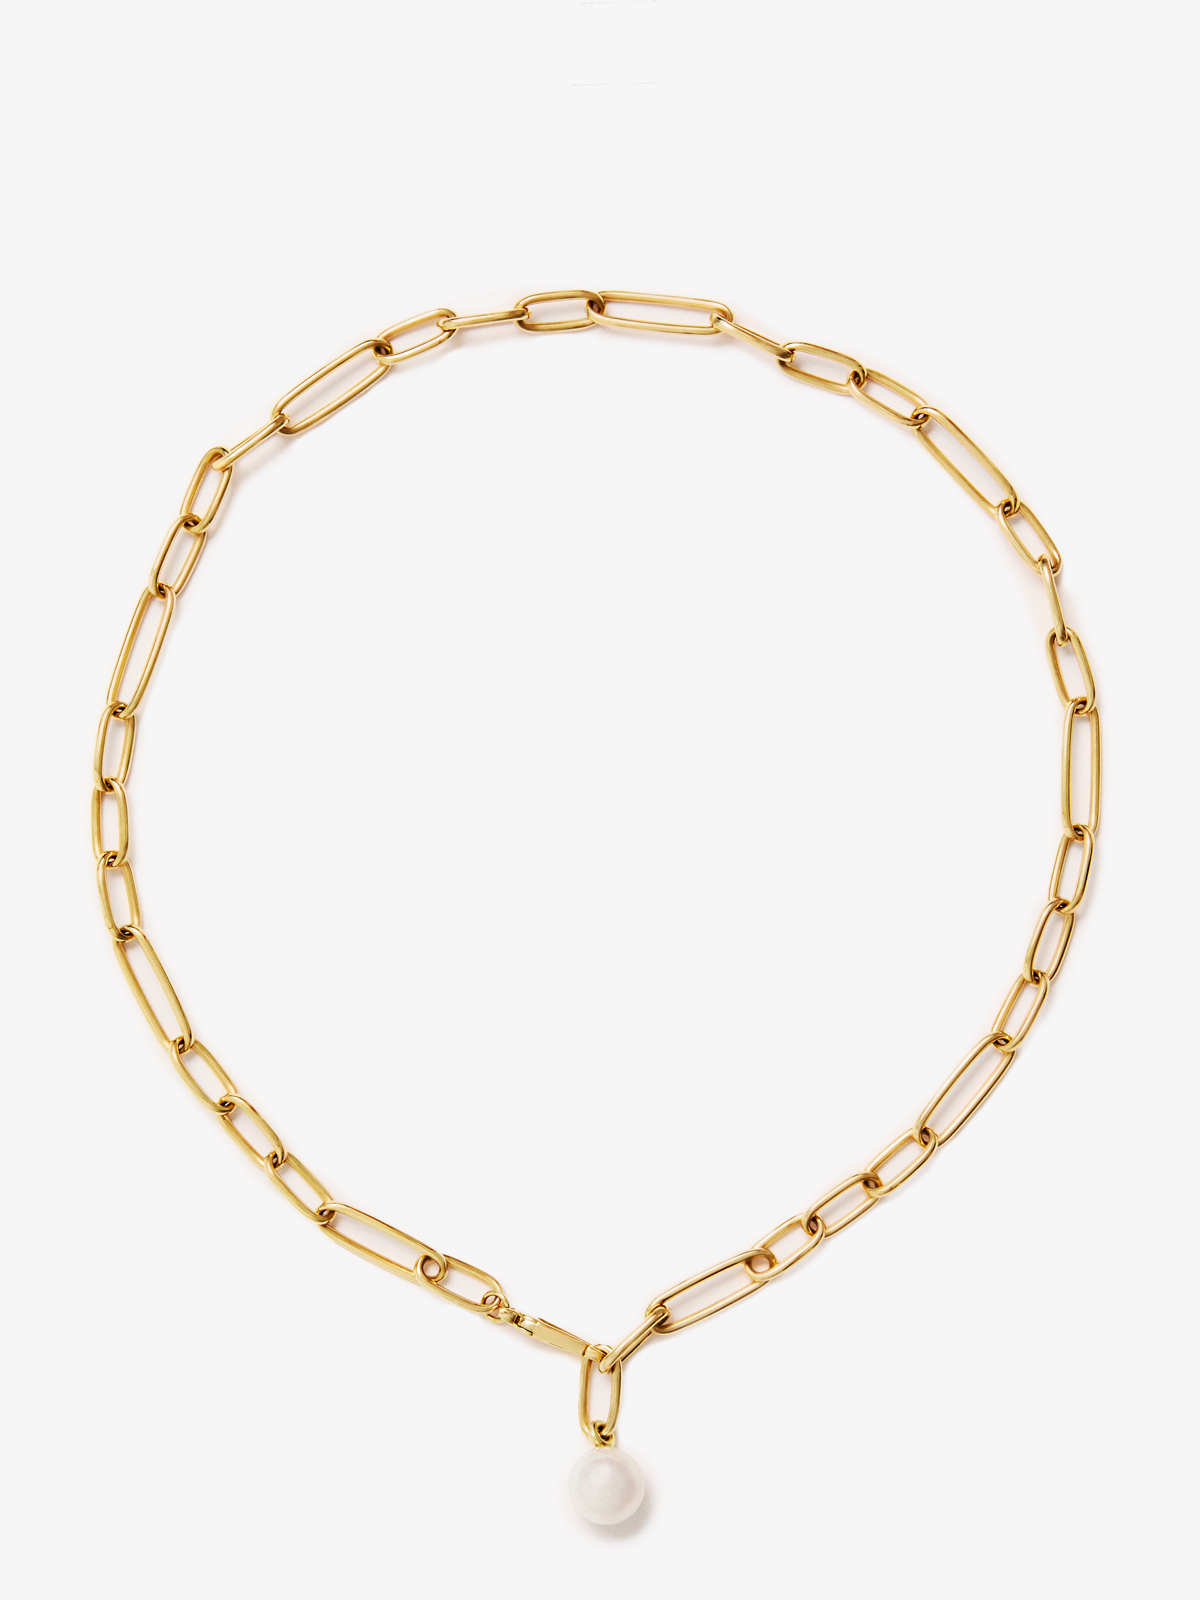 18K Yellow Gold Link Necklace with 11.5mm Australian Pearl